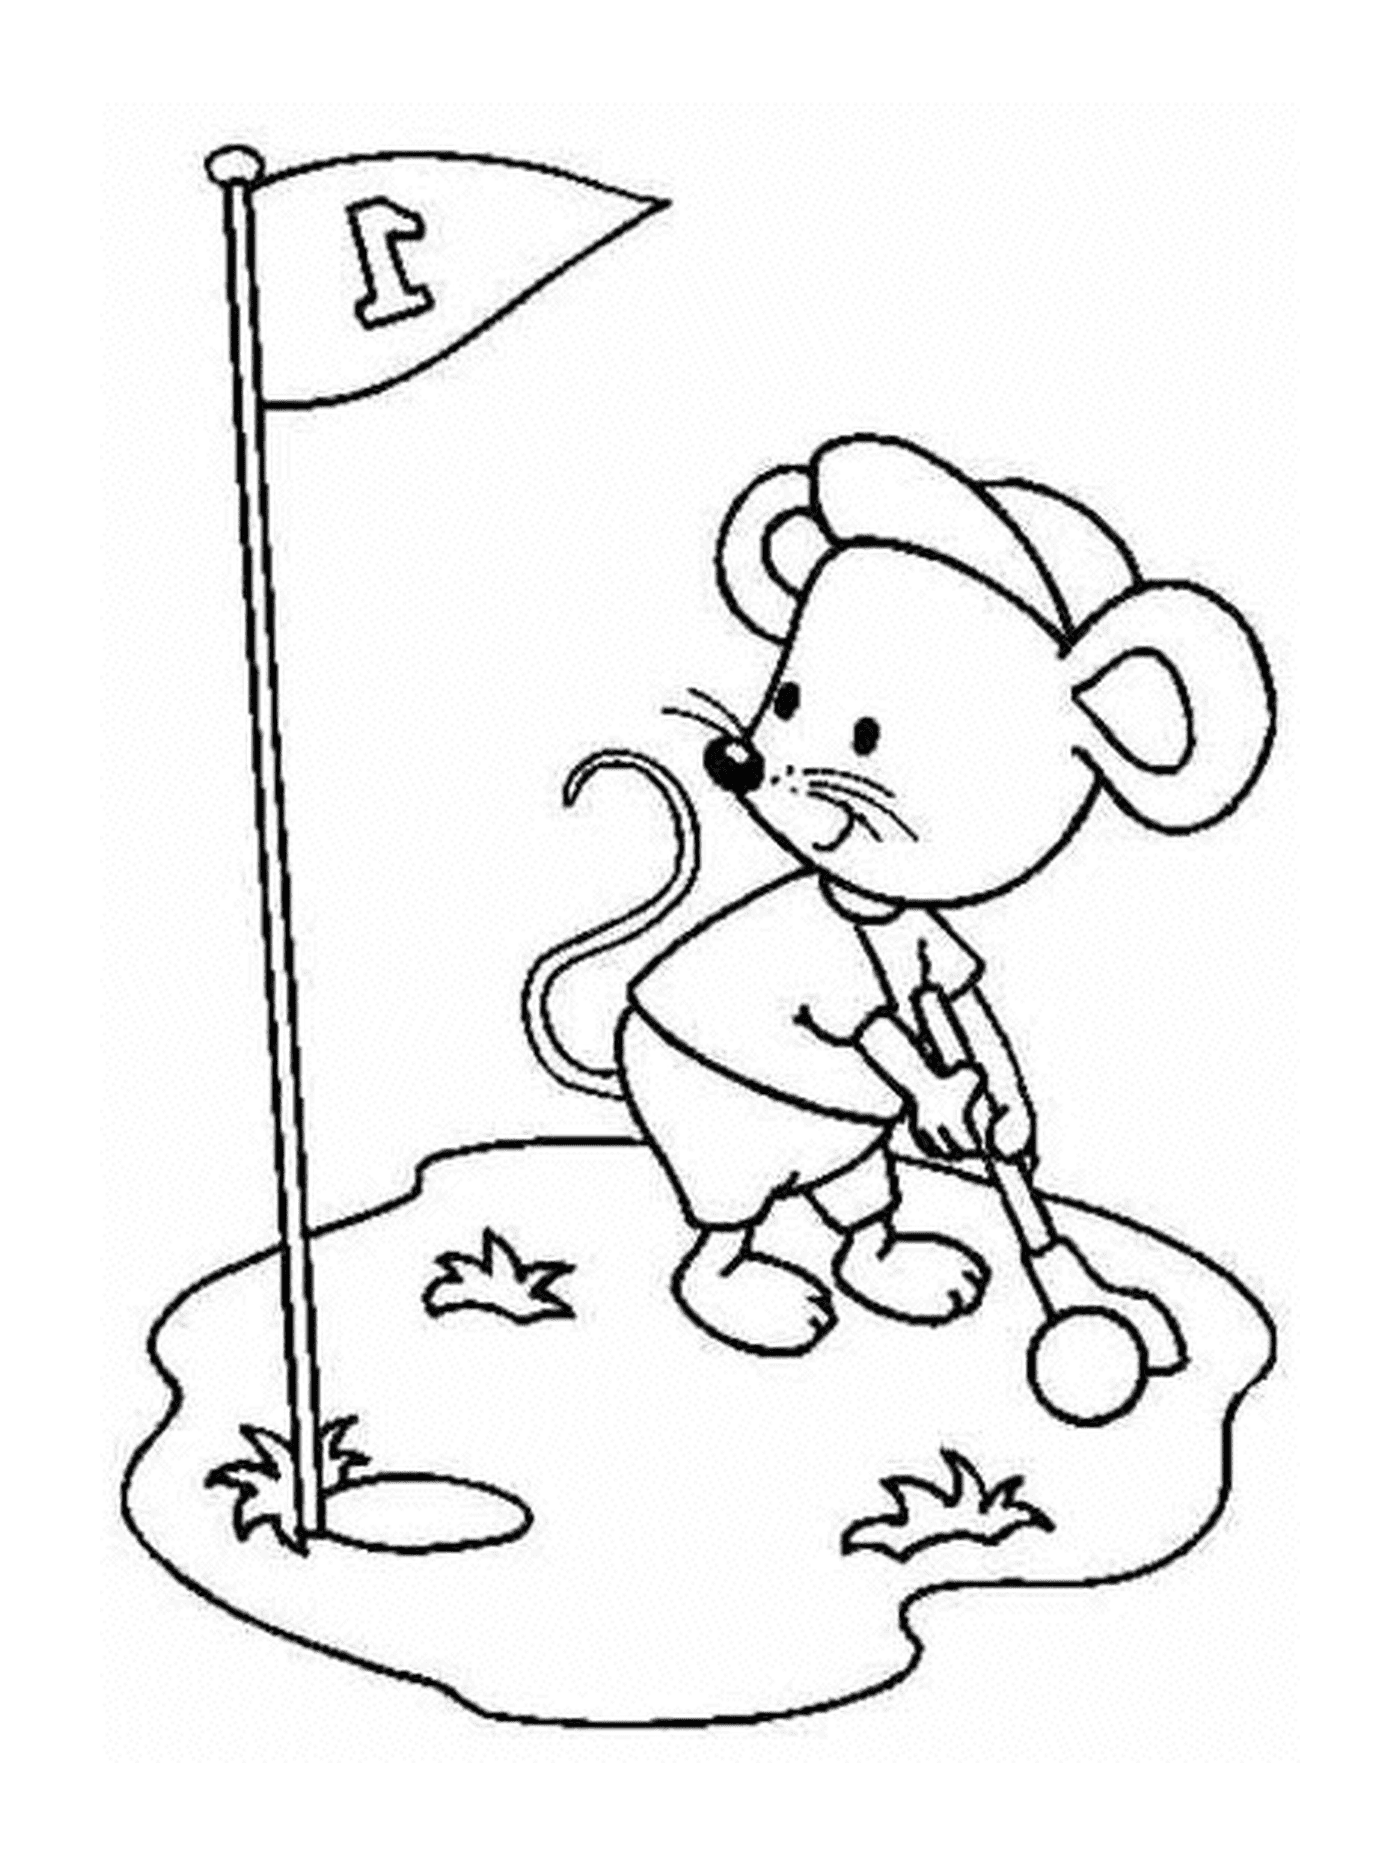  A mouse playing golf 